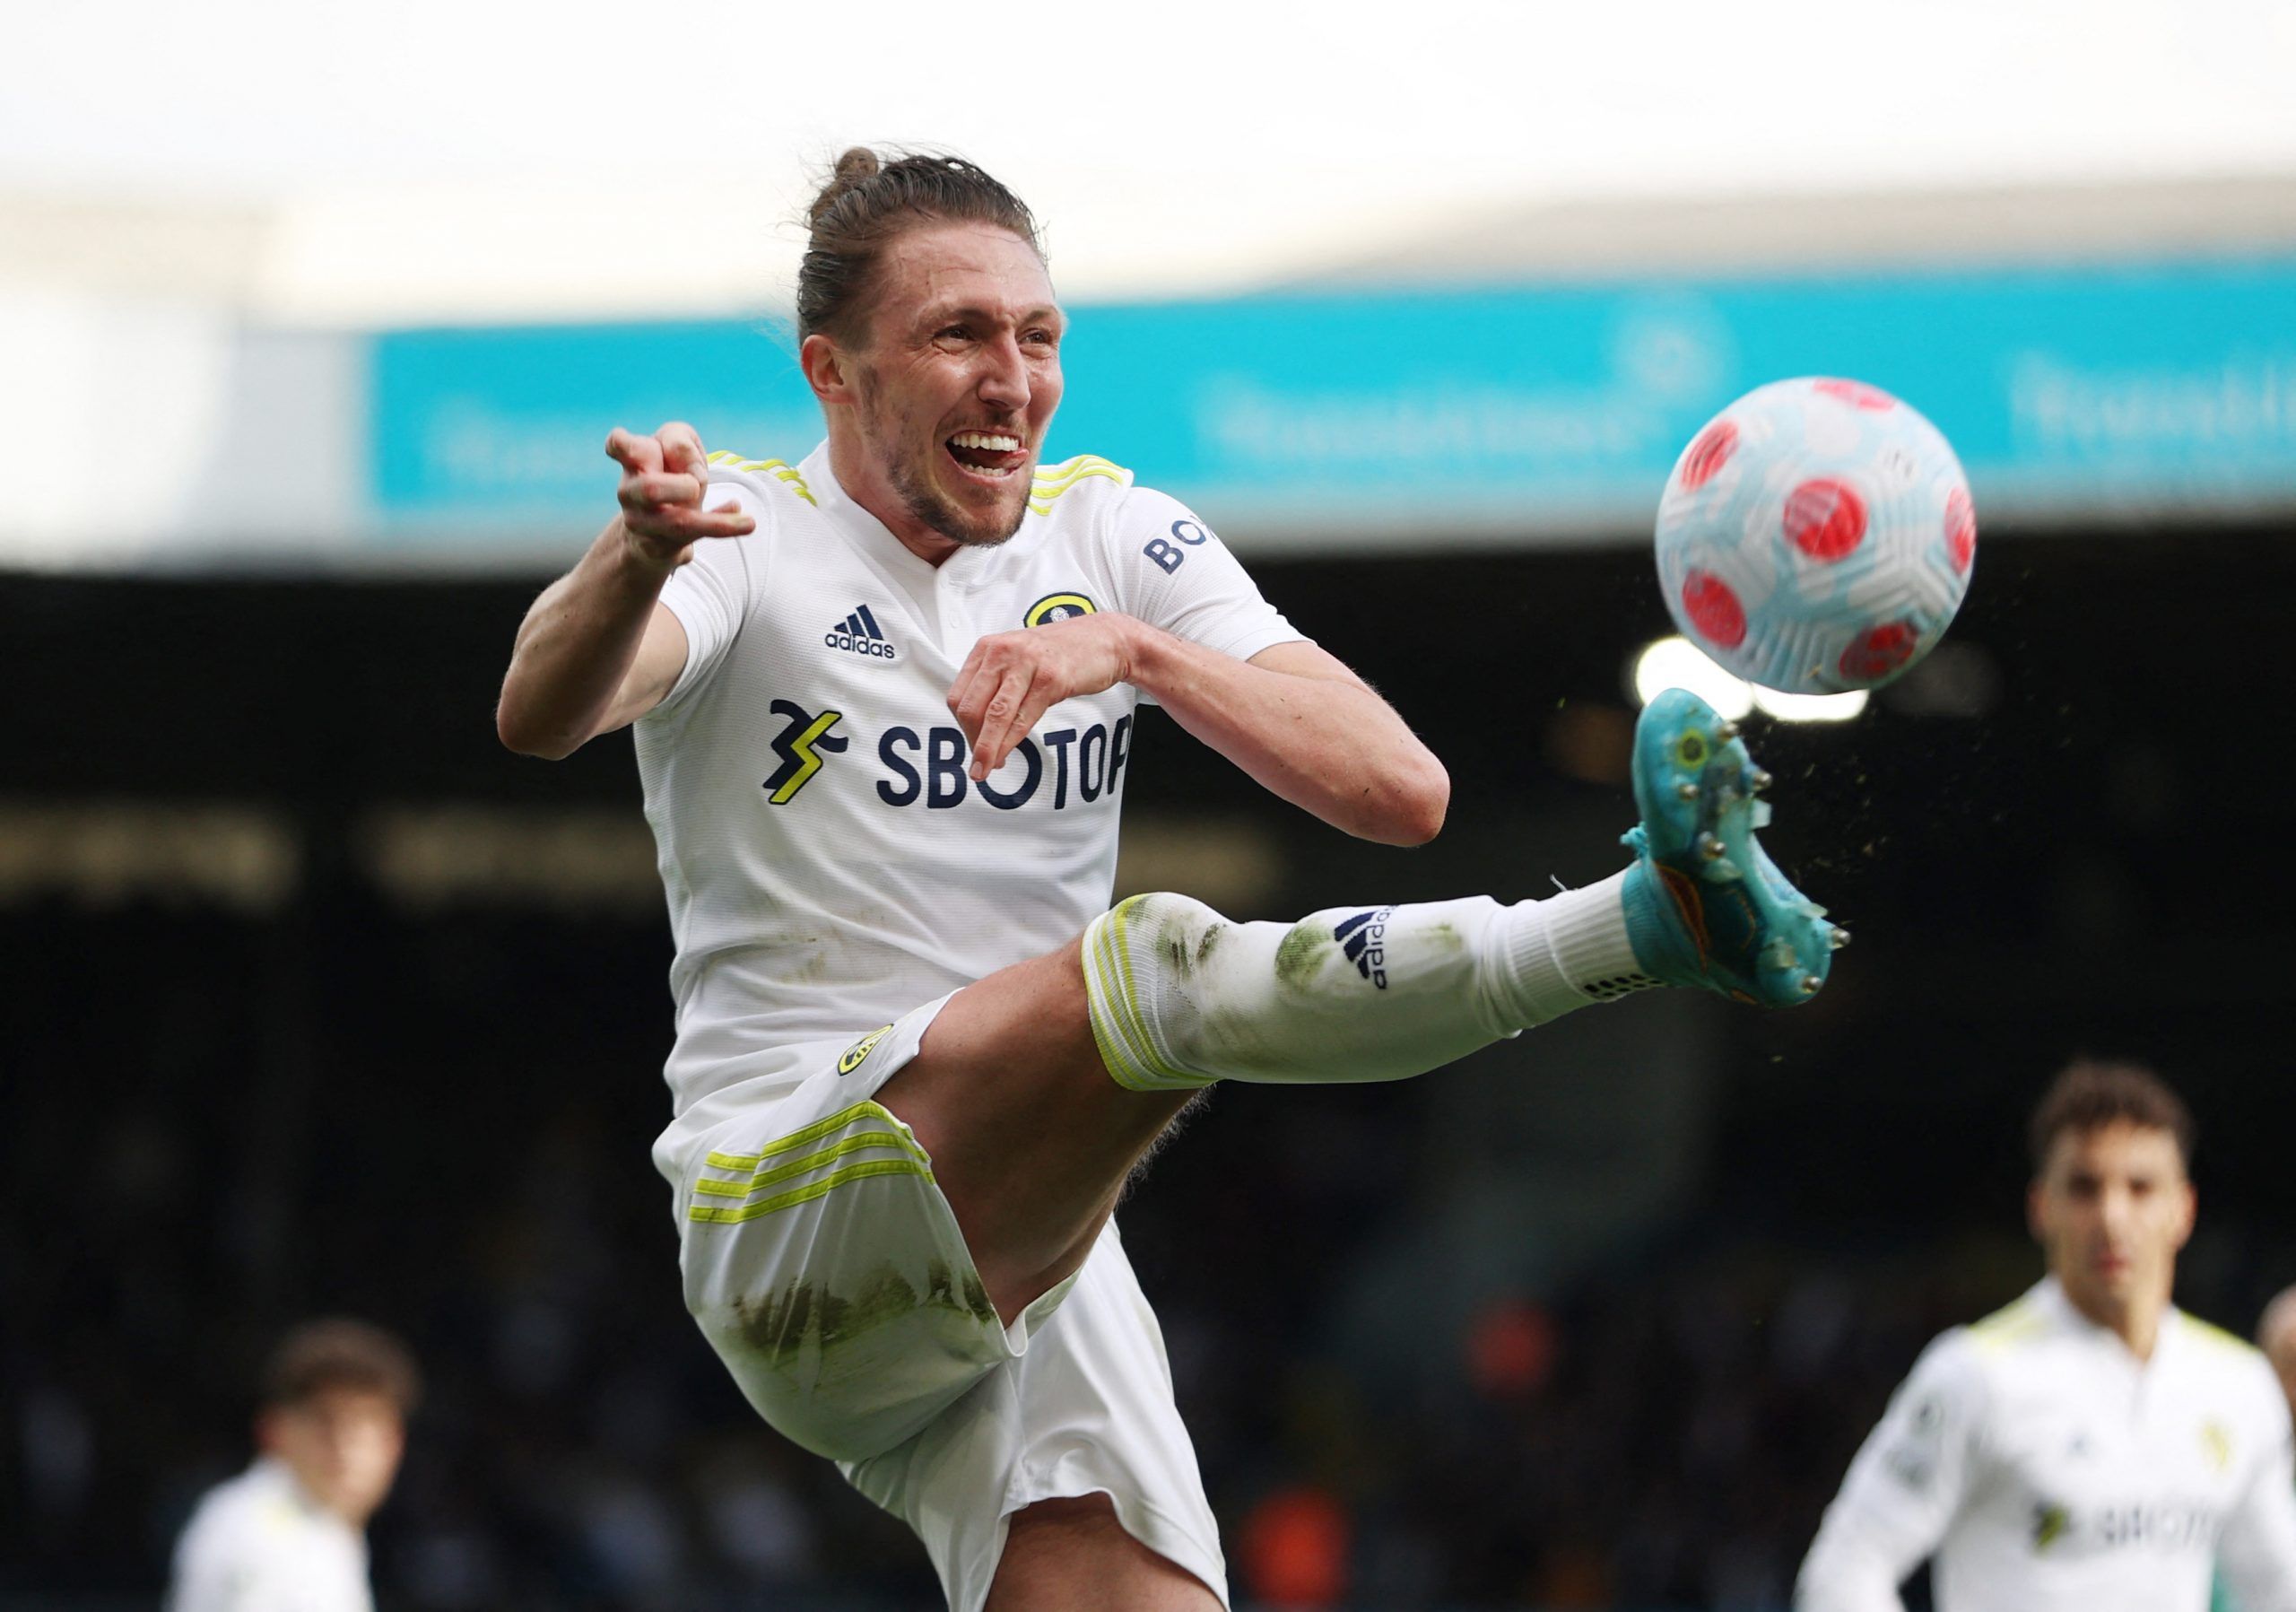 Soccer Football - Premier League - Leeds United v Southampton - Elland Road, Leeds, Britain - April 2, 2022 Leeds United's Luke Ayling in action Action Images via Reuters/Molly Darlington EDITORIAL USE ONLY. No use with unauthorized audio, video, data, fixture lists, club/league logos or 'live' services. Online in-match use limited to 75 images, no video emulation. No use in betting, games or single club /league/player publications.  Please contact your account representative for further details